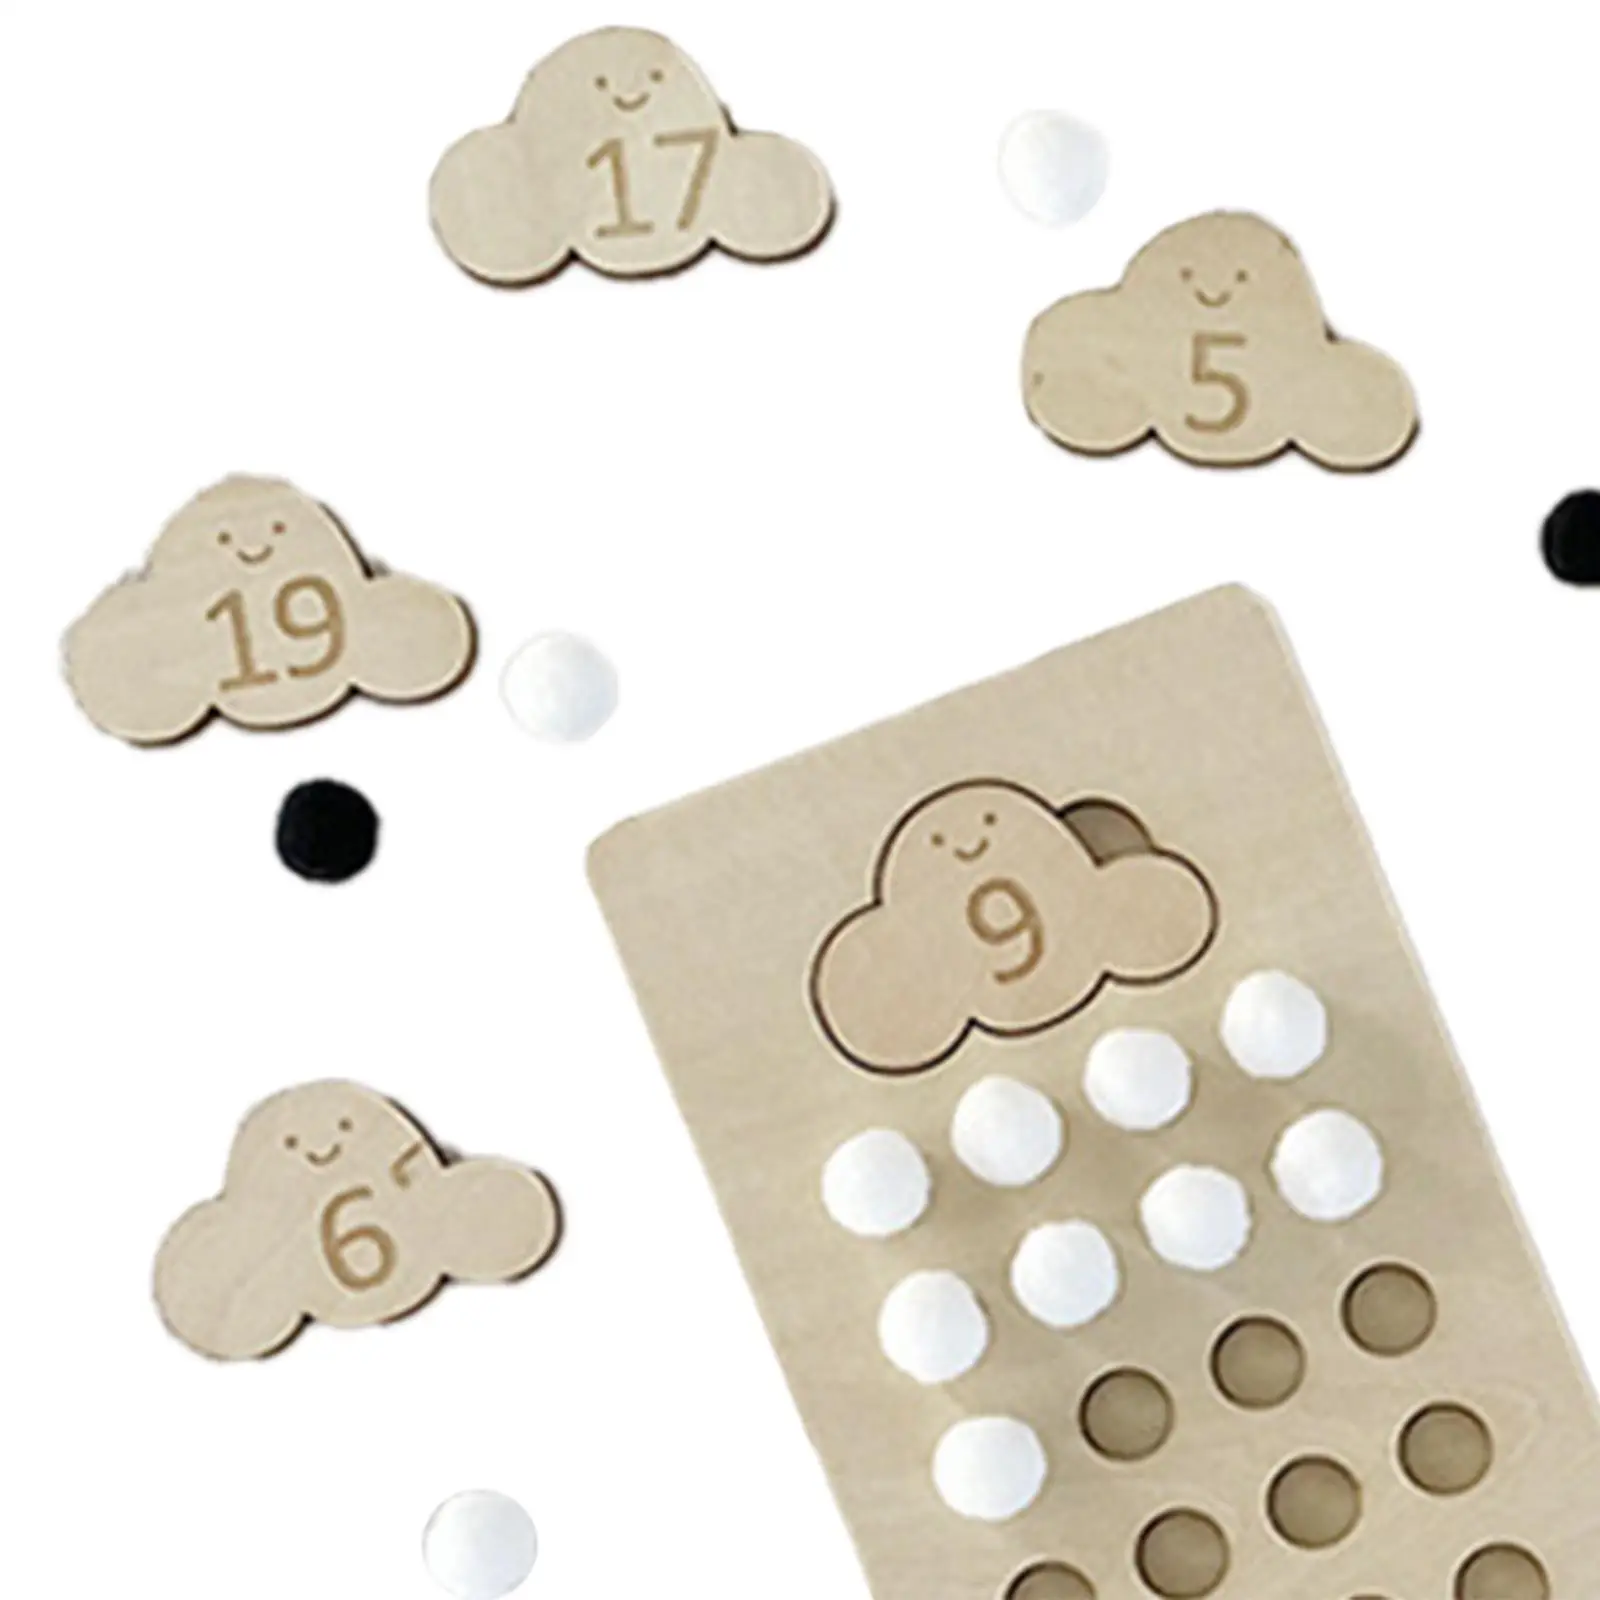 clouds Shaped bead boards Game Sorting Stacking Toys Number Tracing Board for Game Early Education